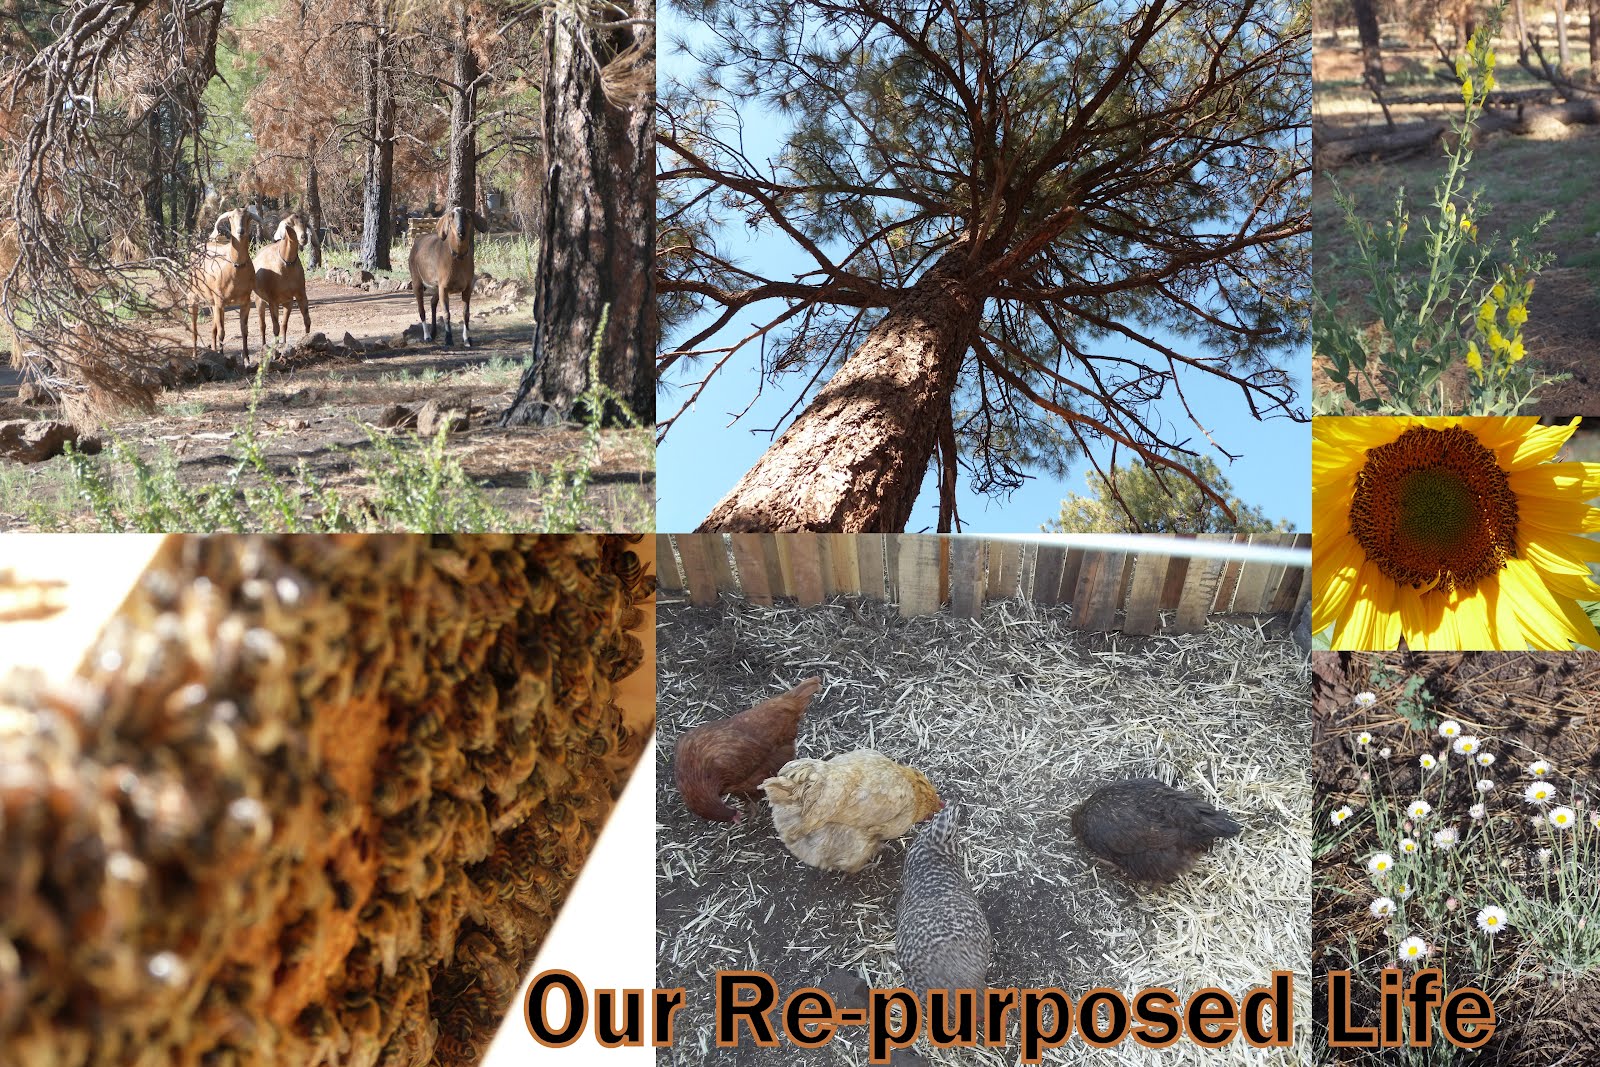 Our Re-purposed Life